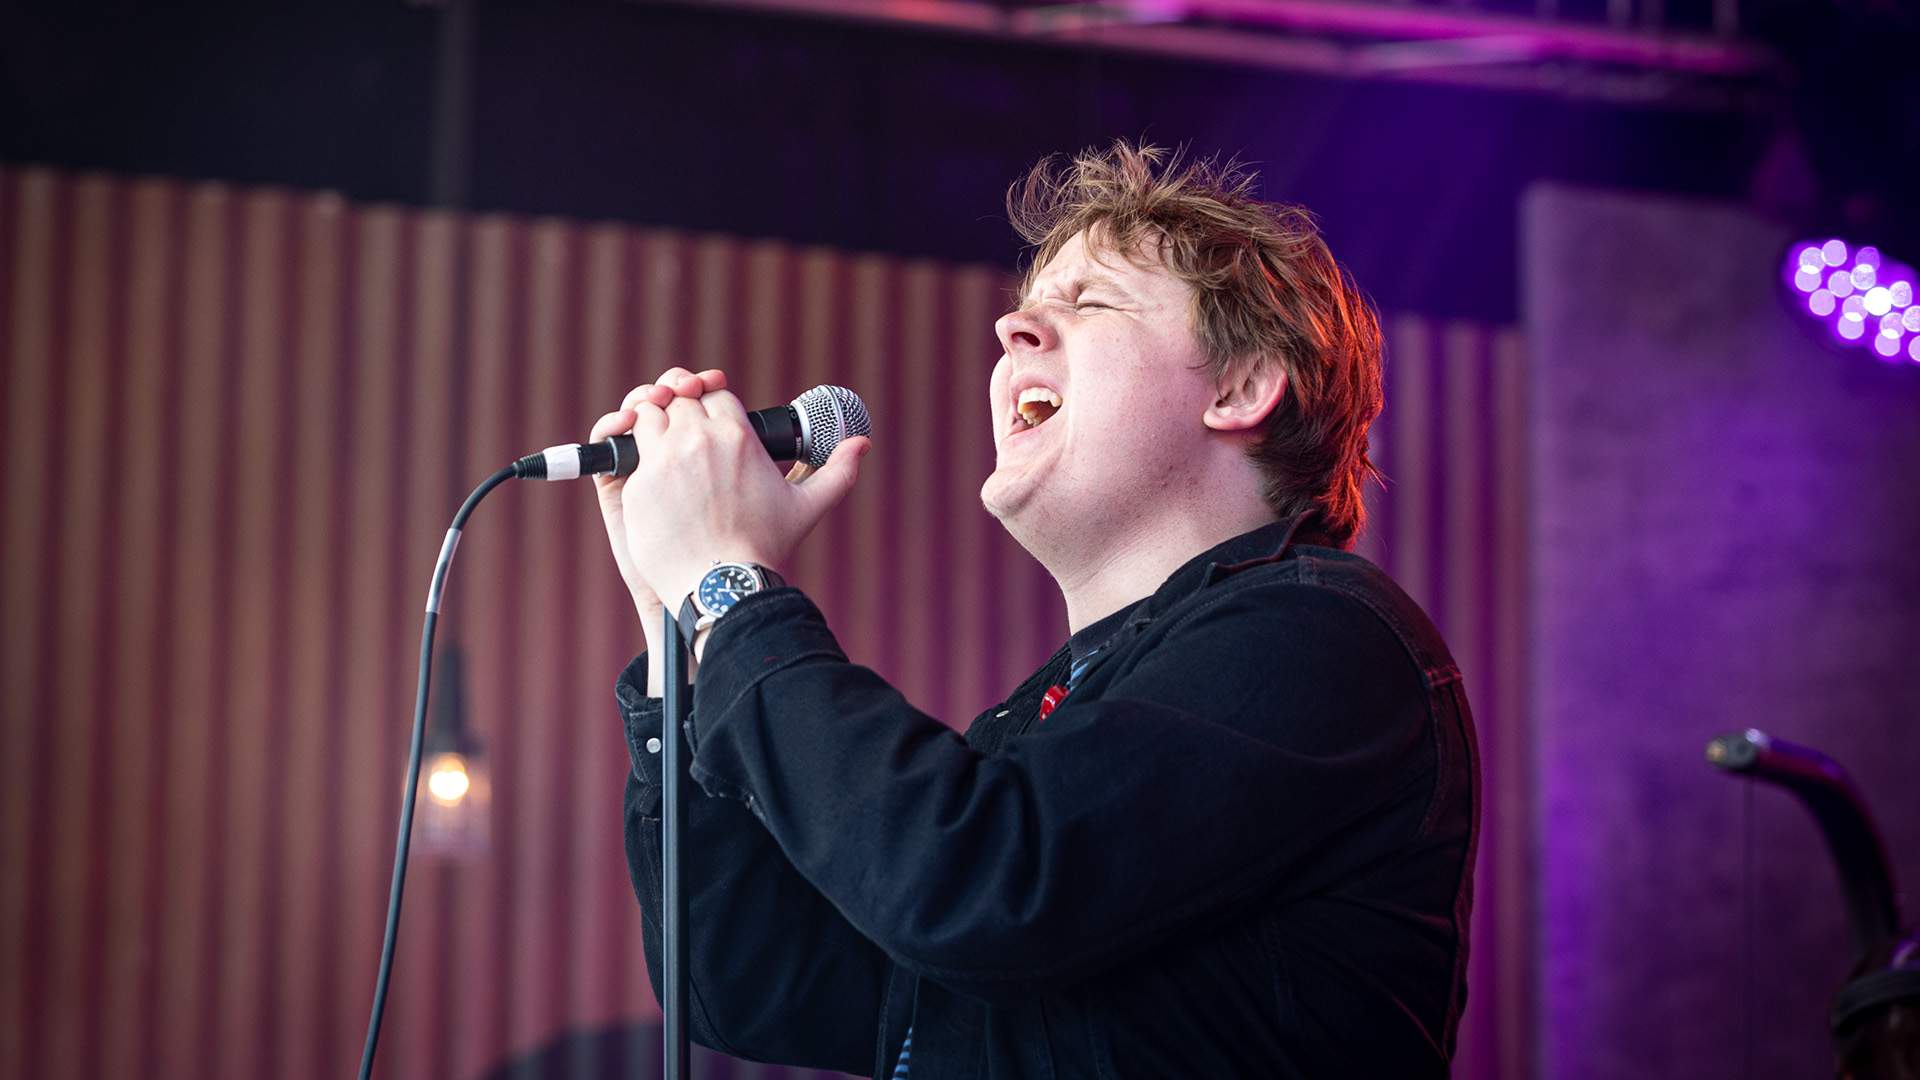 Lewis Capaldi Has Cancelled His Splendour in the Grass Set and Other Tour Dates Down Under